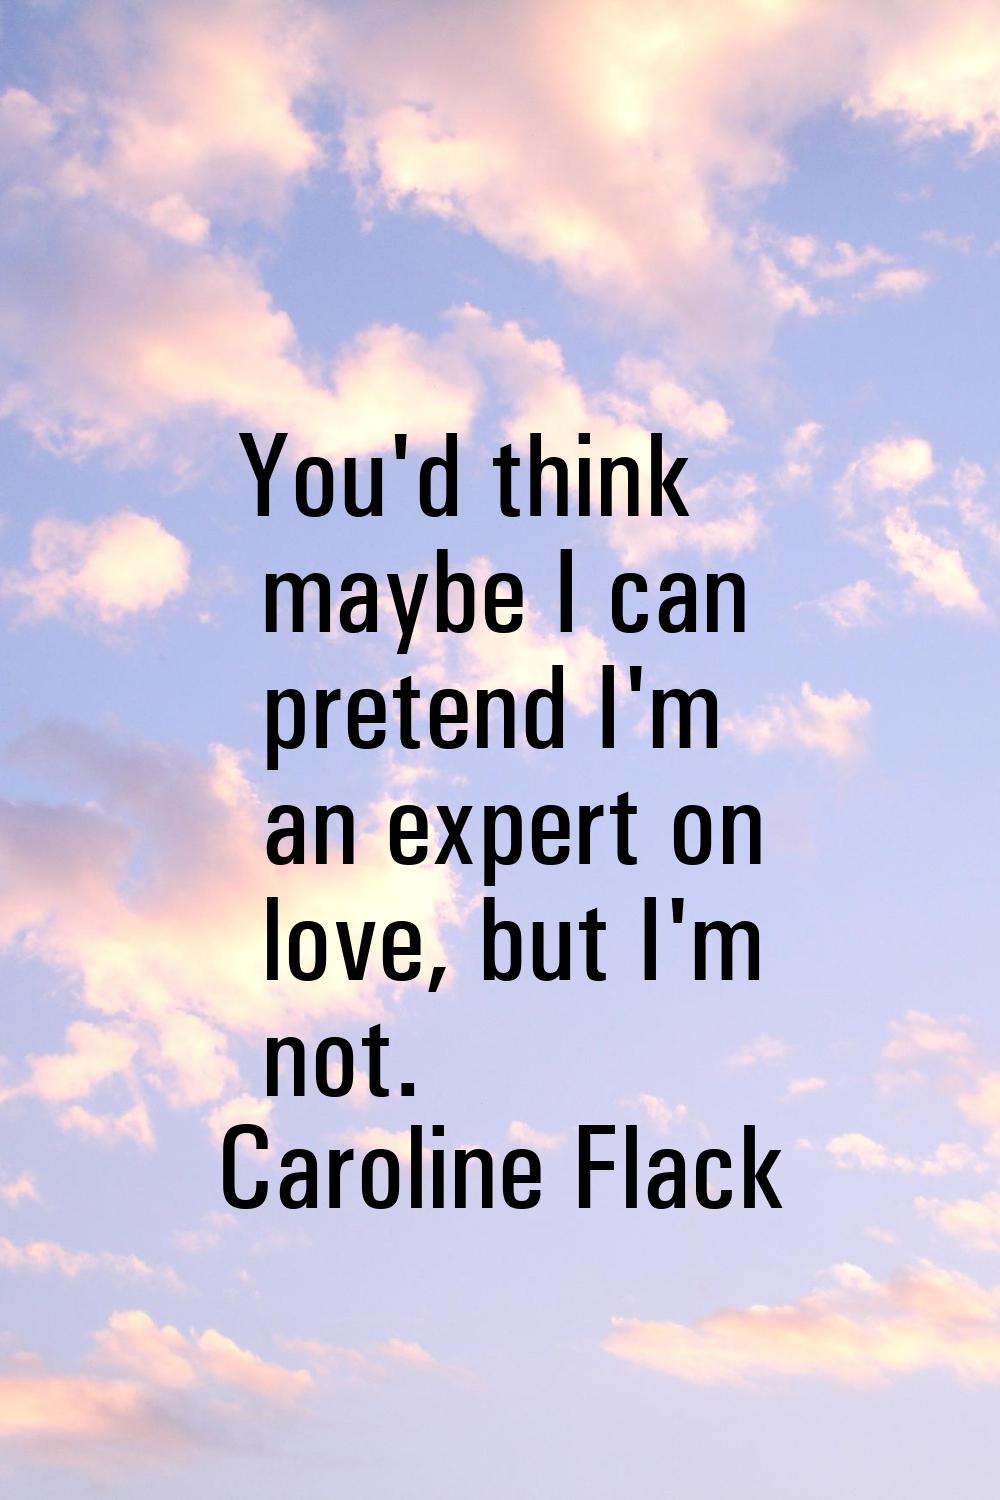 You'd think maybe I can pretend I'm an expert on love, but I'm not.